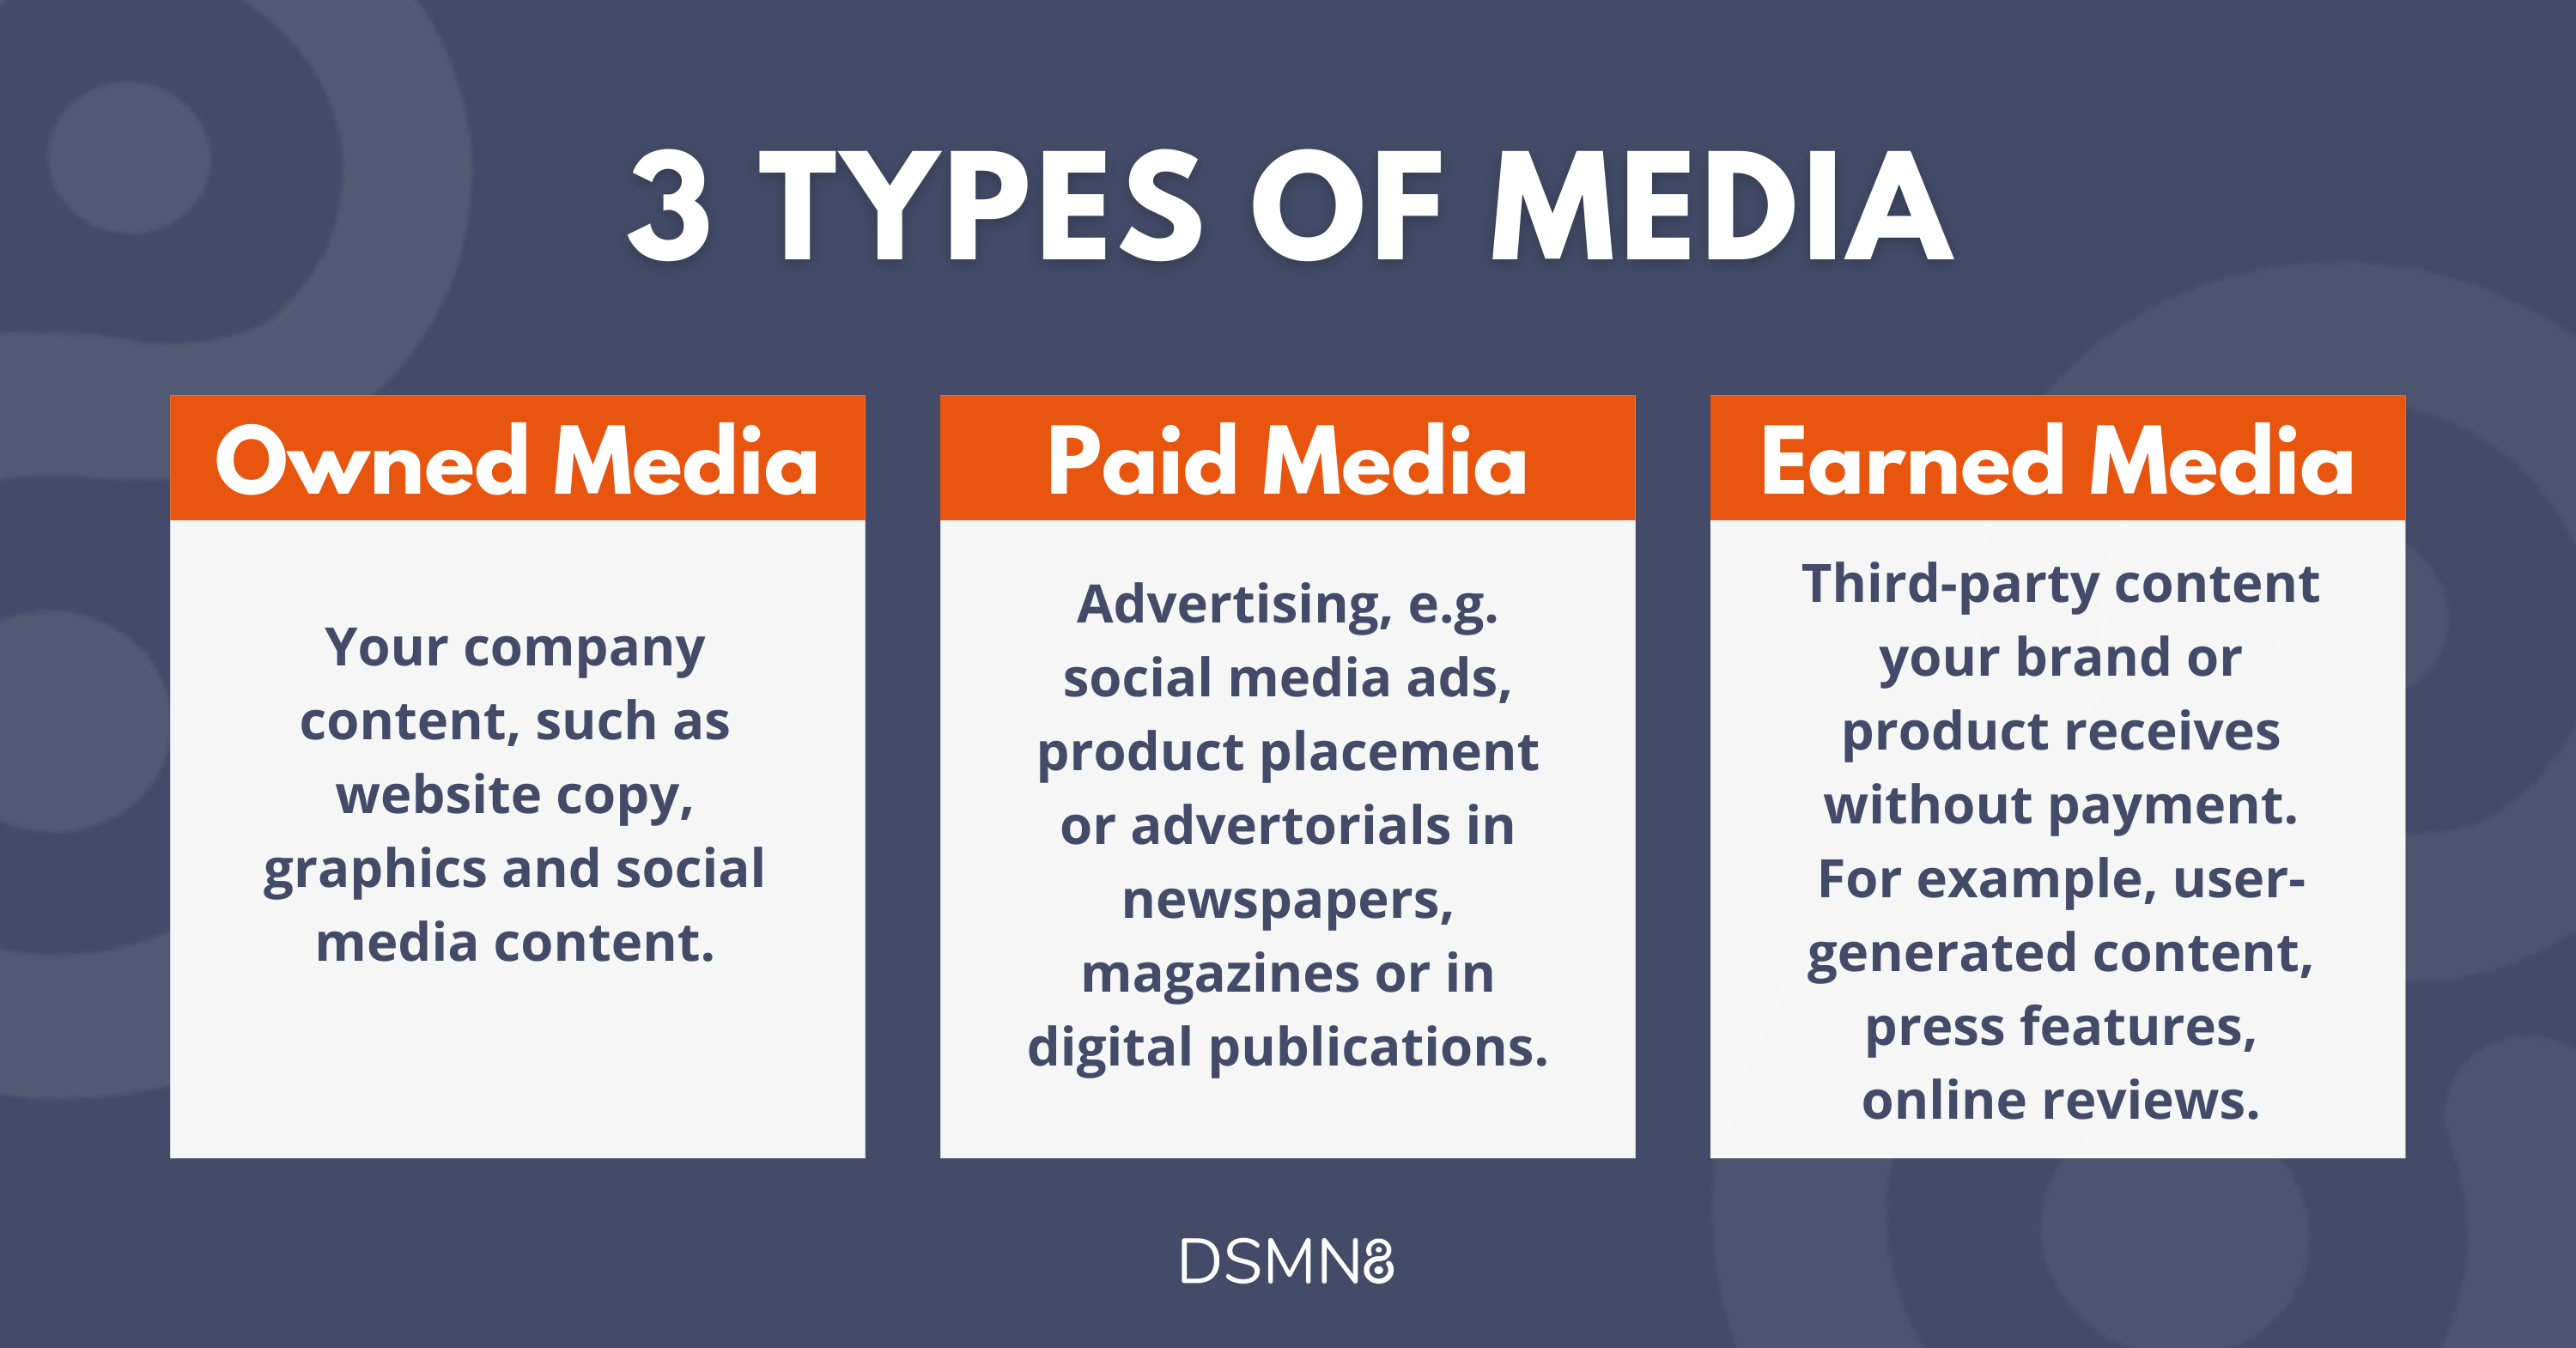 3 types of media: owned media, paid media, and earned media